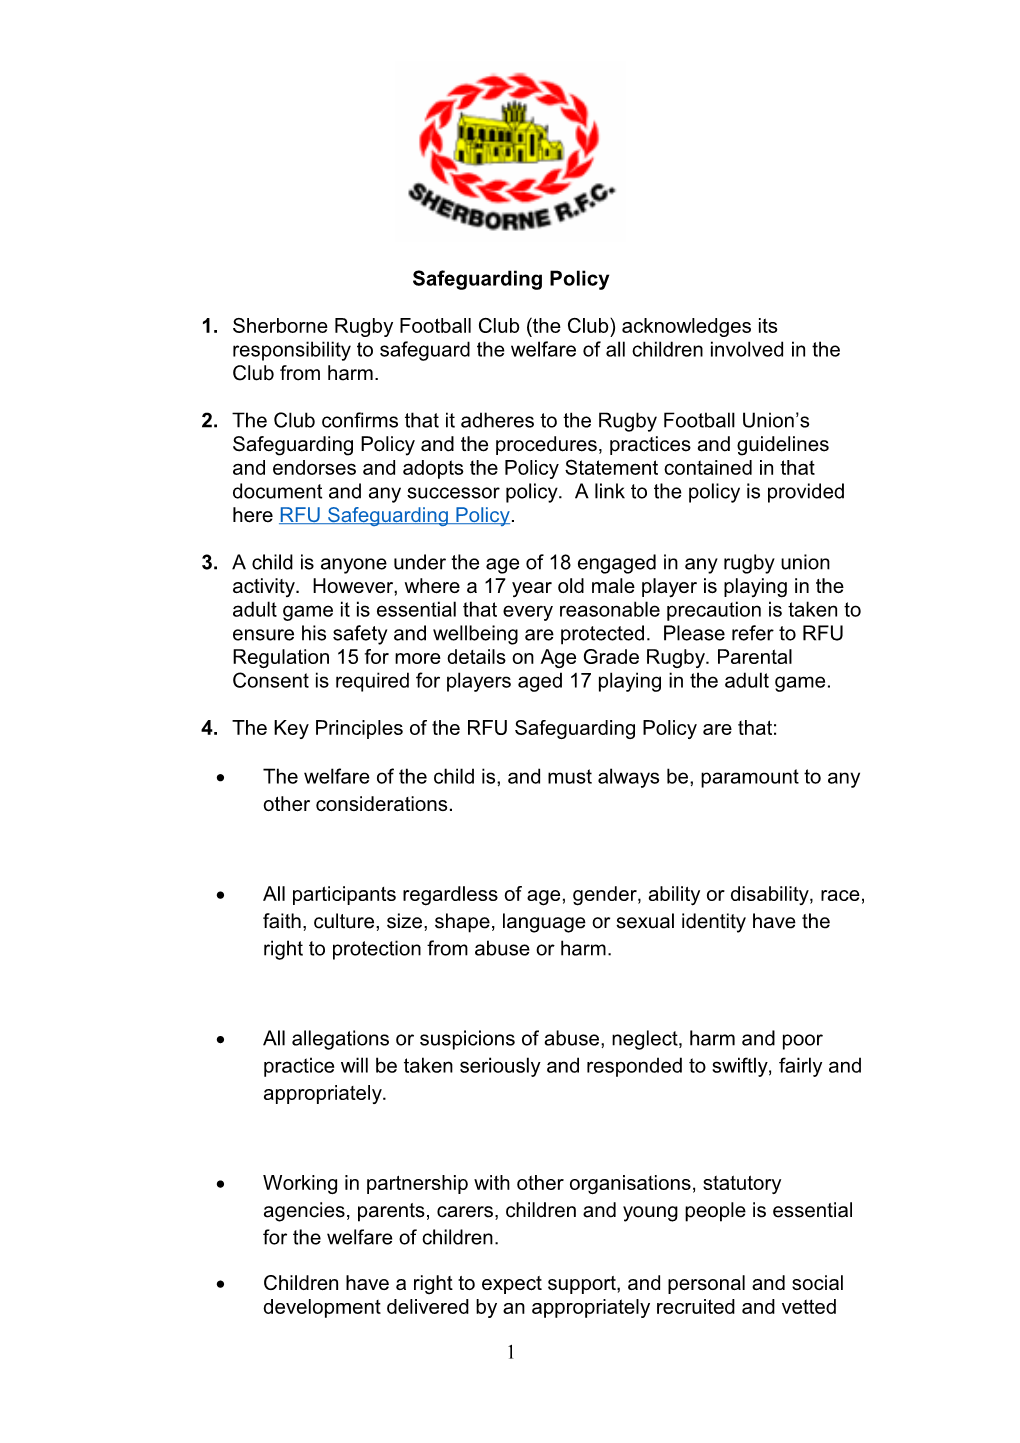 Club Safeguarding Policy Template